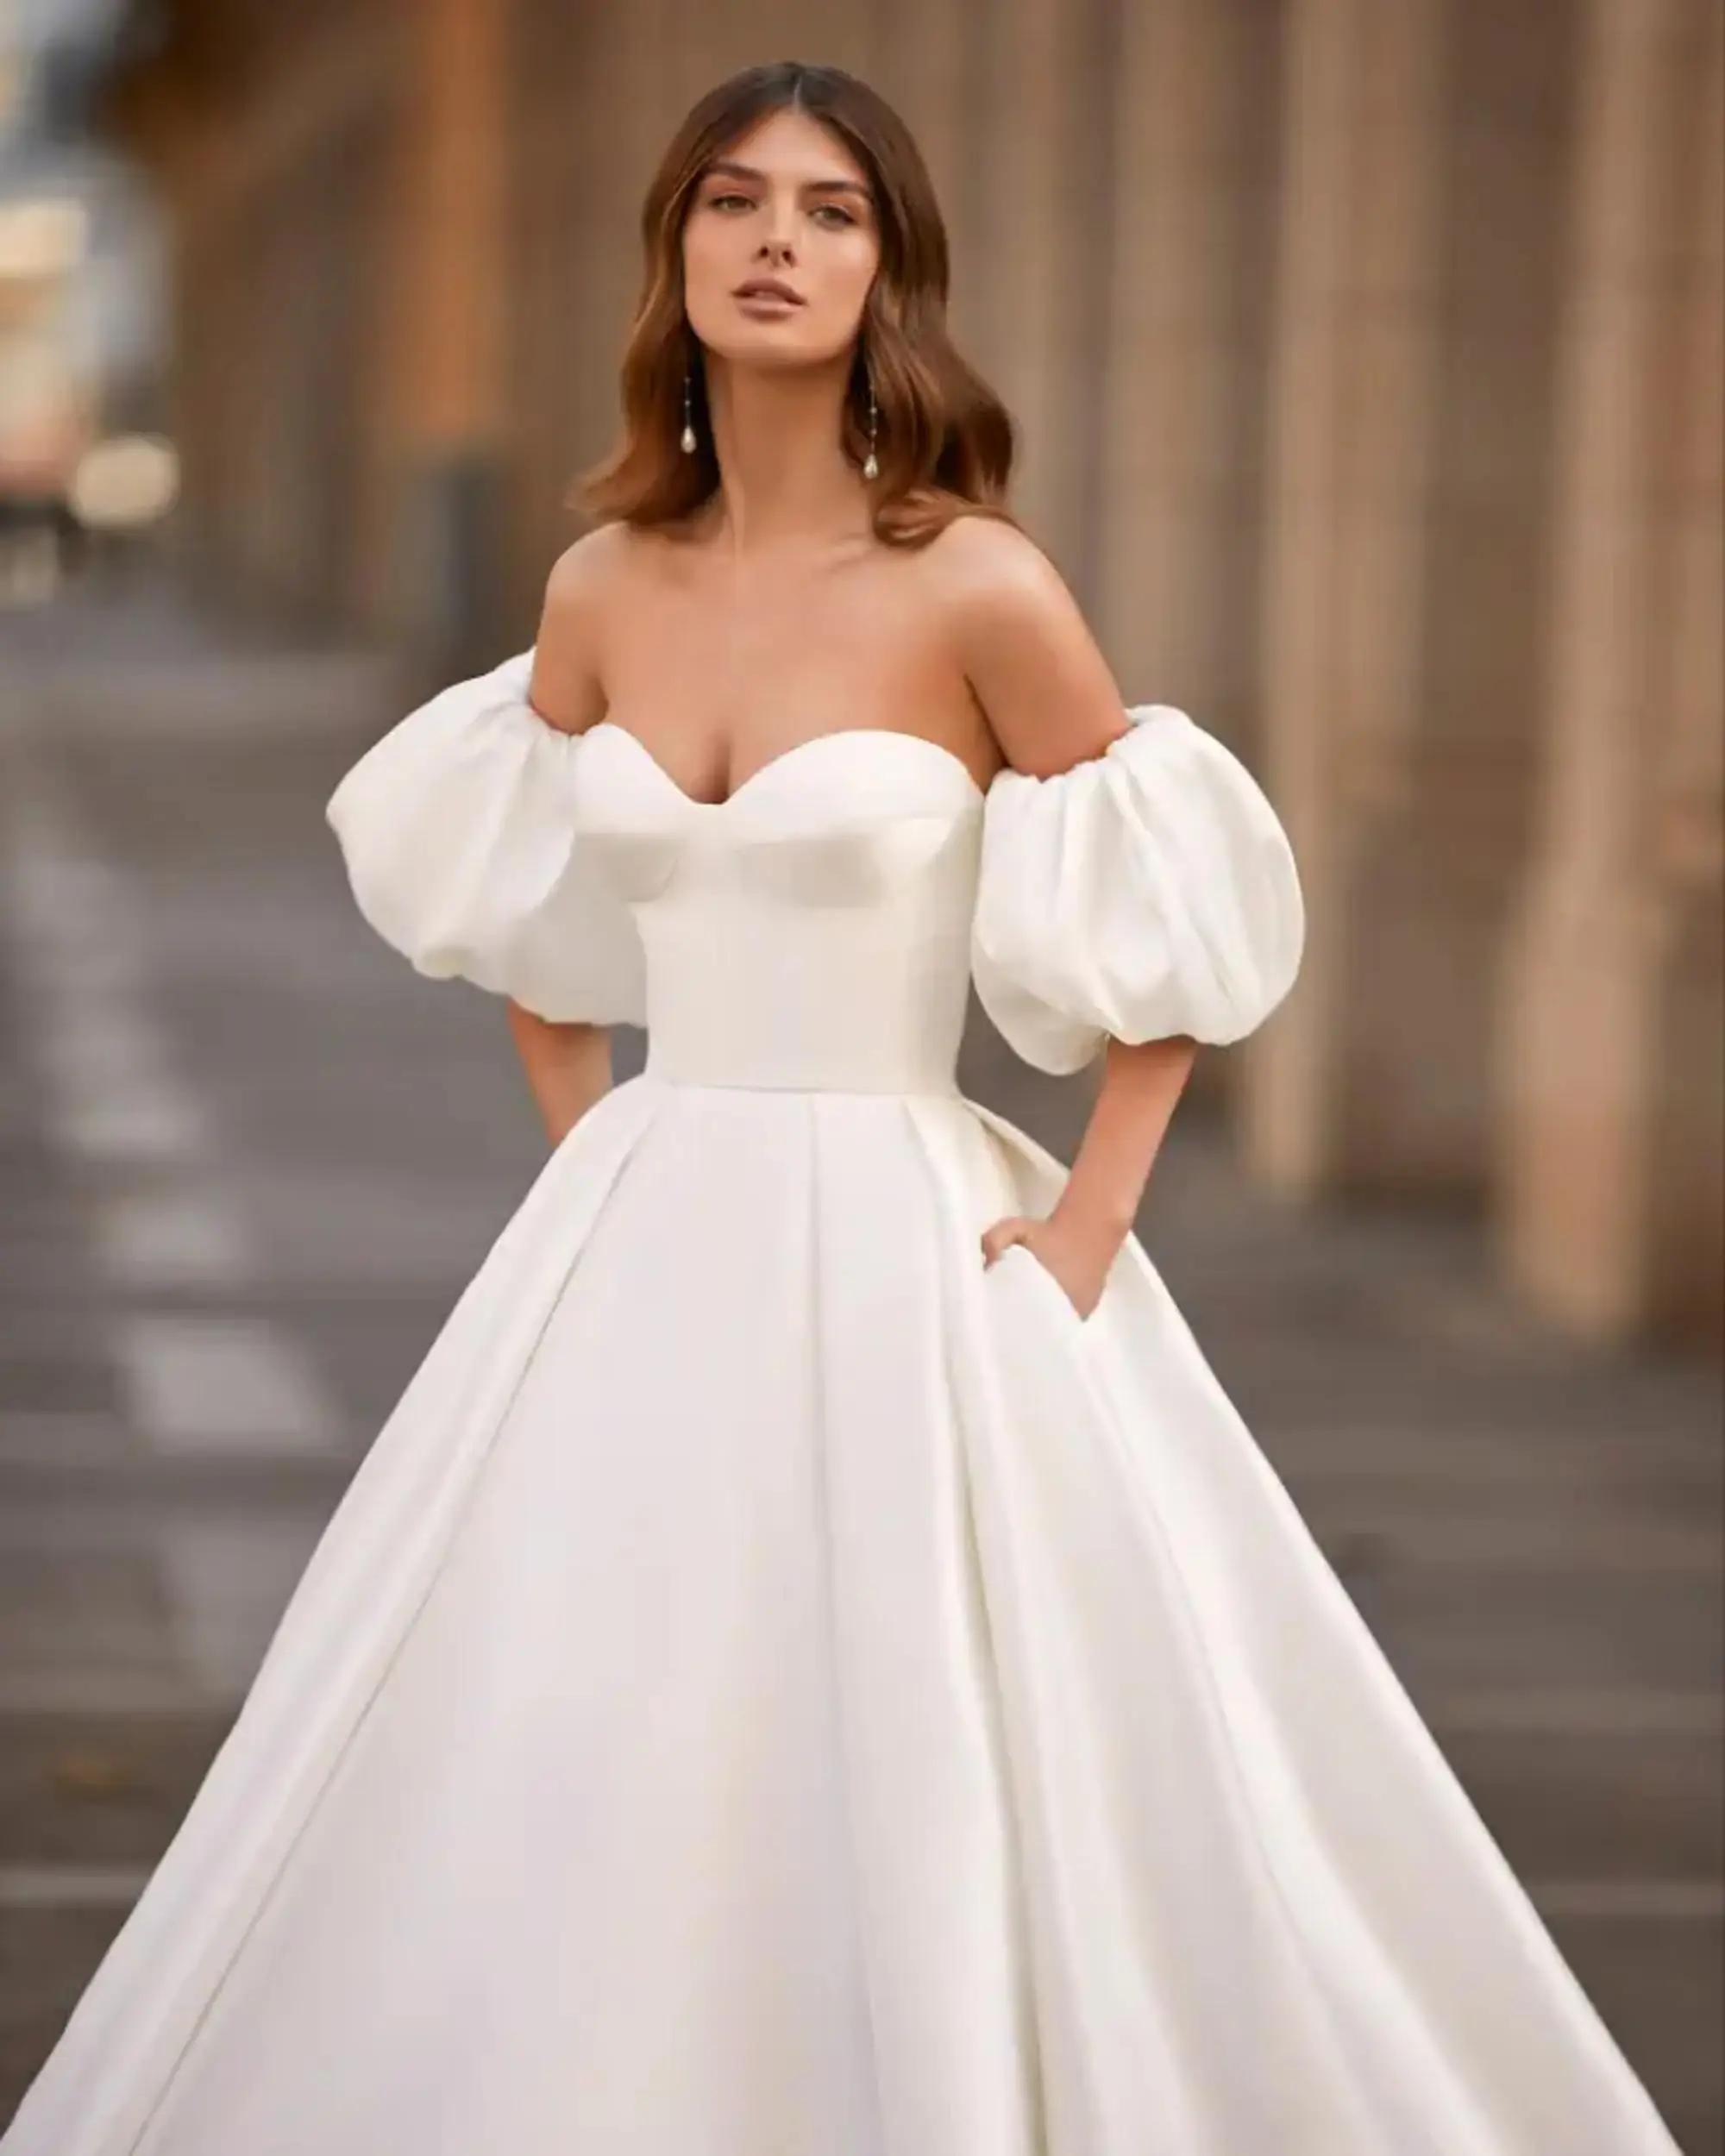 Necklines &amp; Silhouettes: Finding Harmony in Your Bridal Ensemble Image